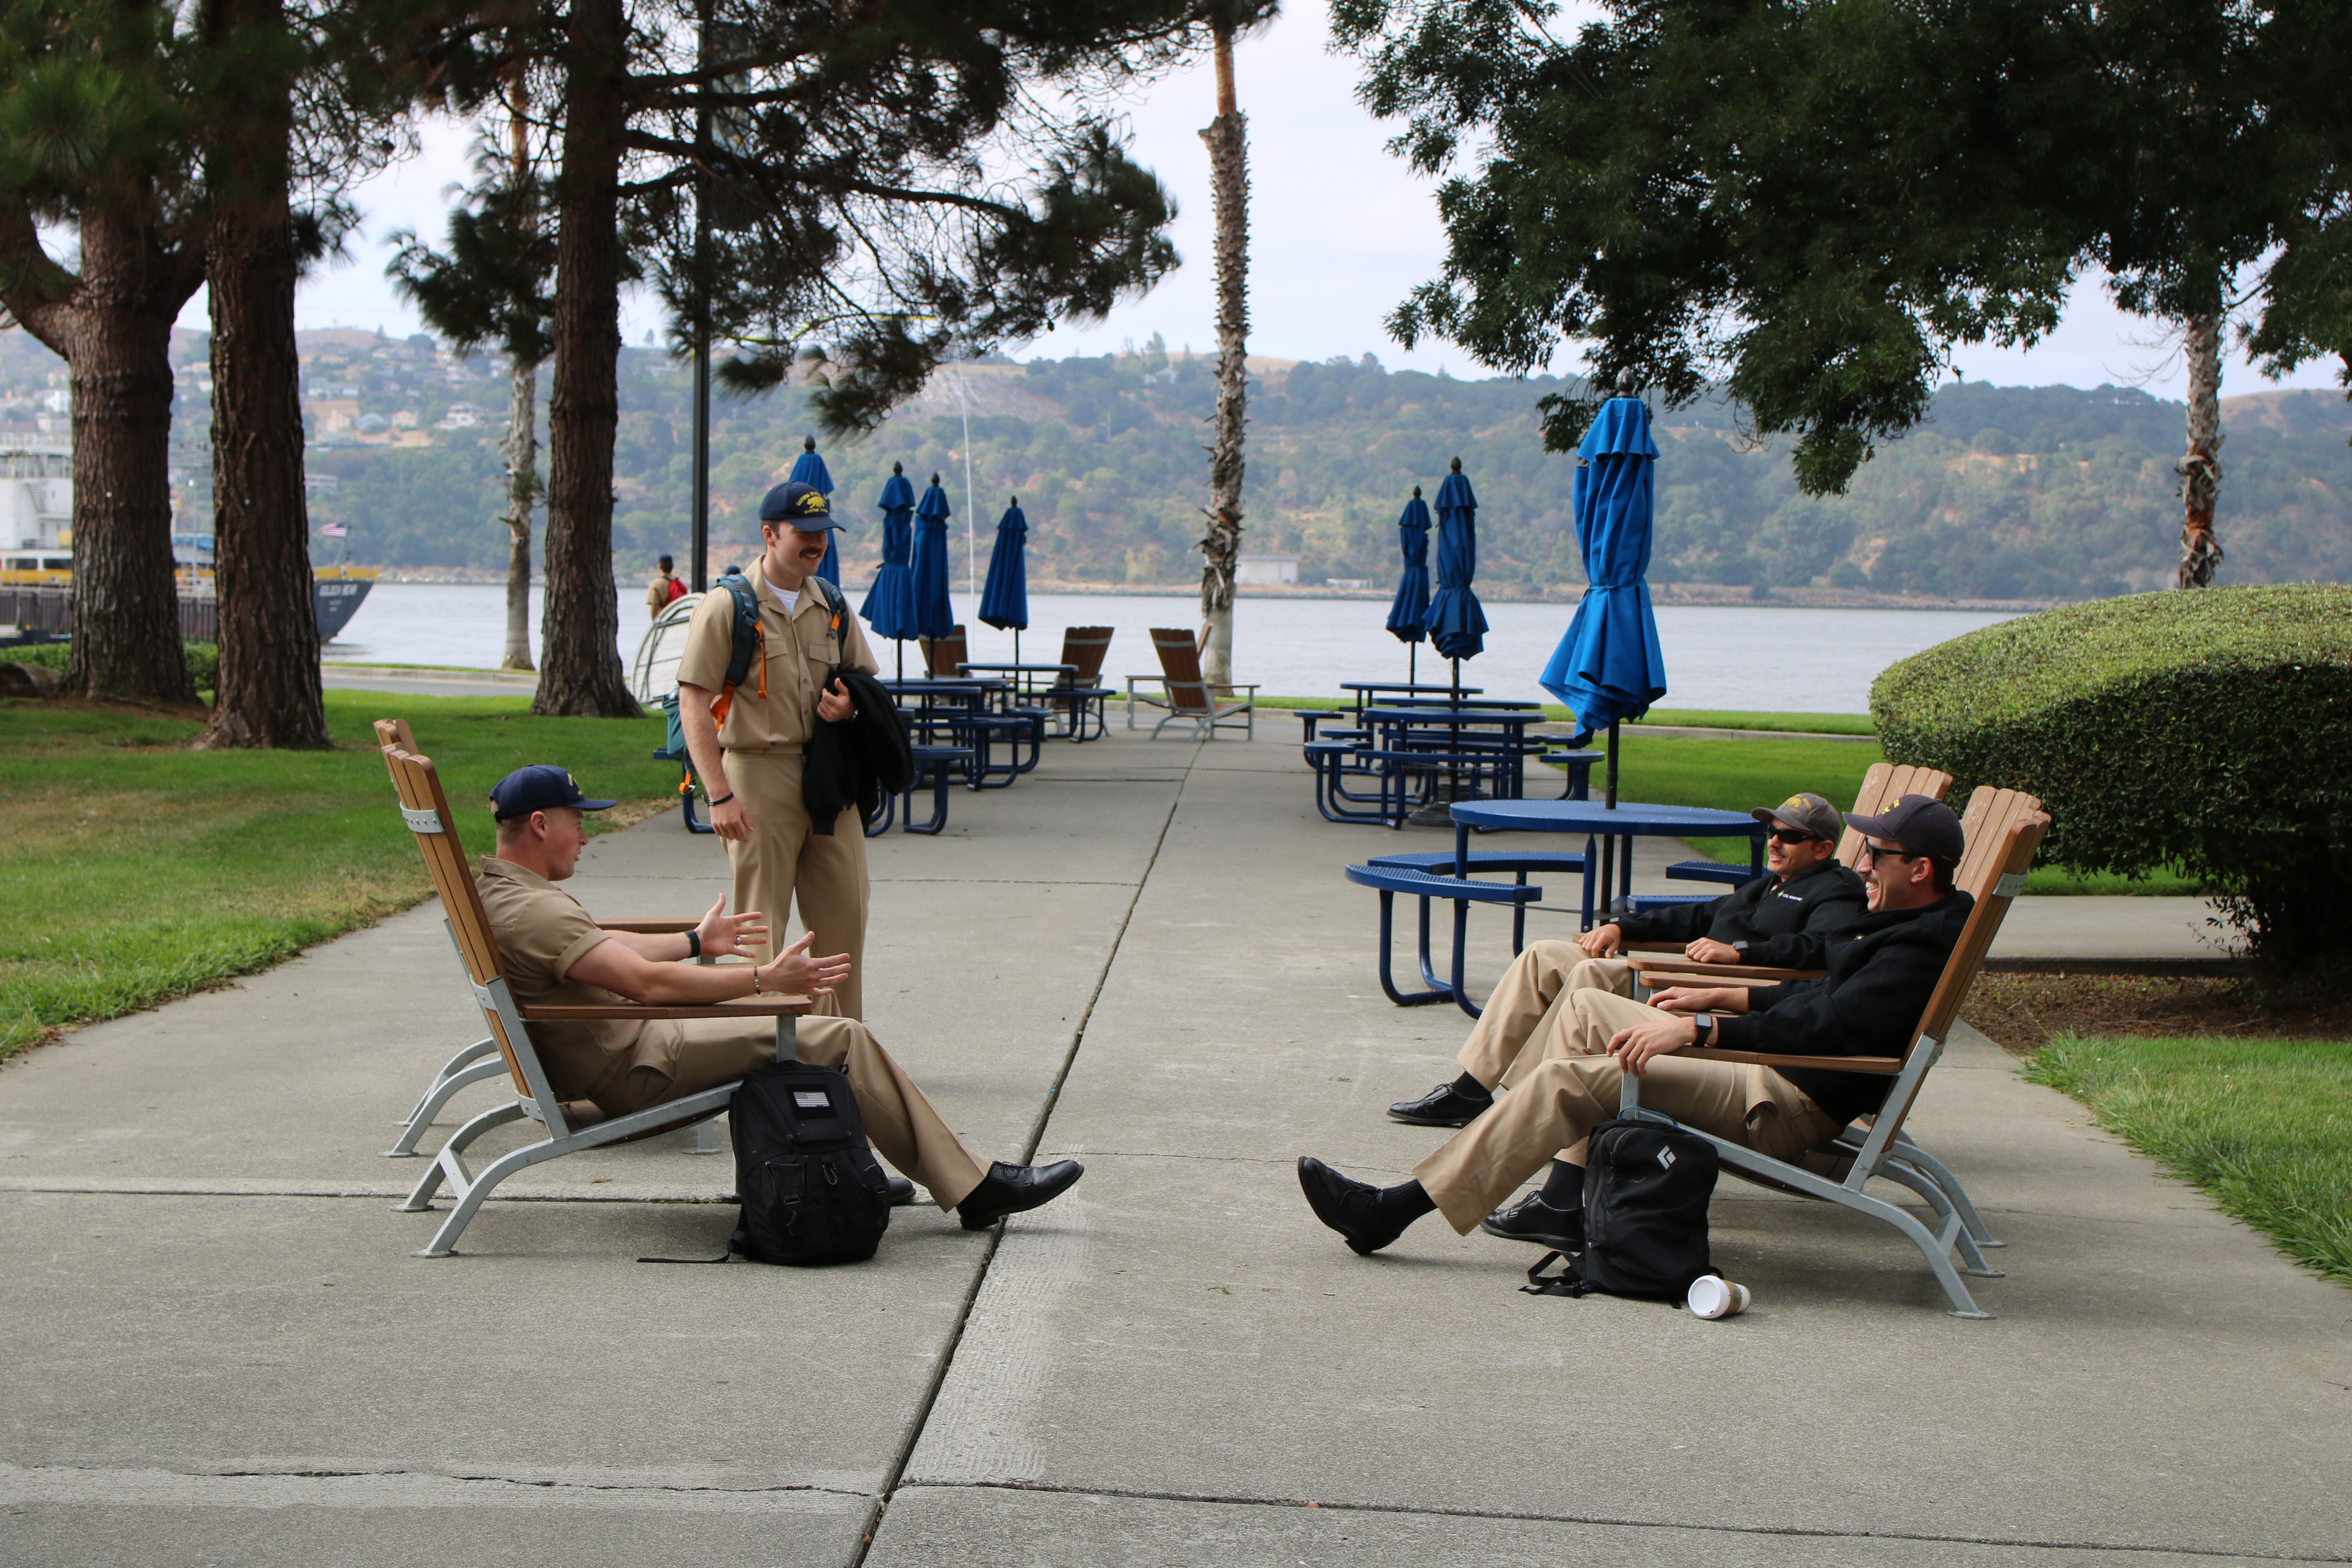 Cadets relax on chairs on campus waterfront